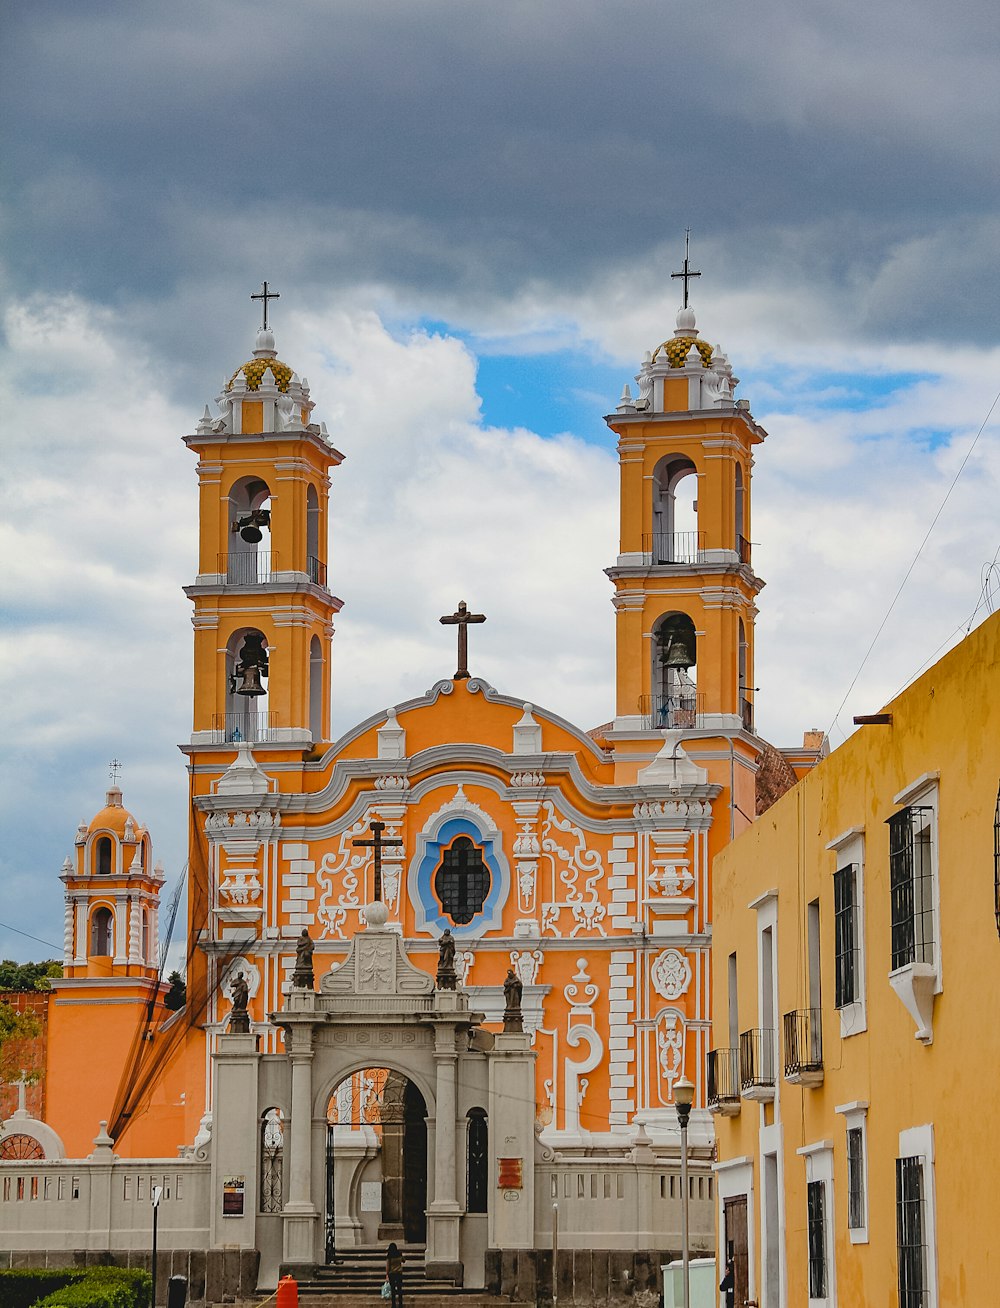 an orange and white church with two towers